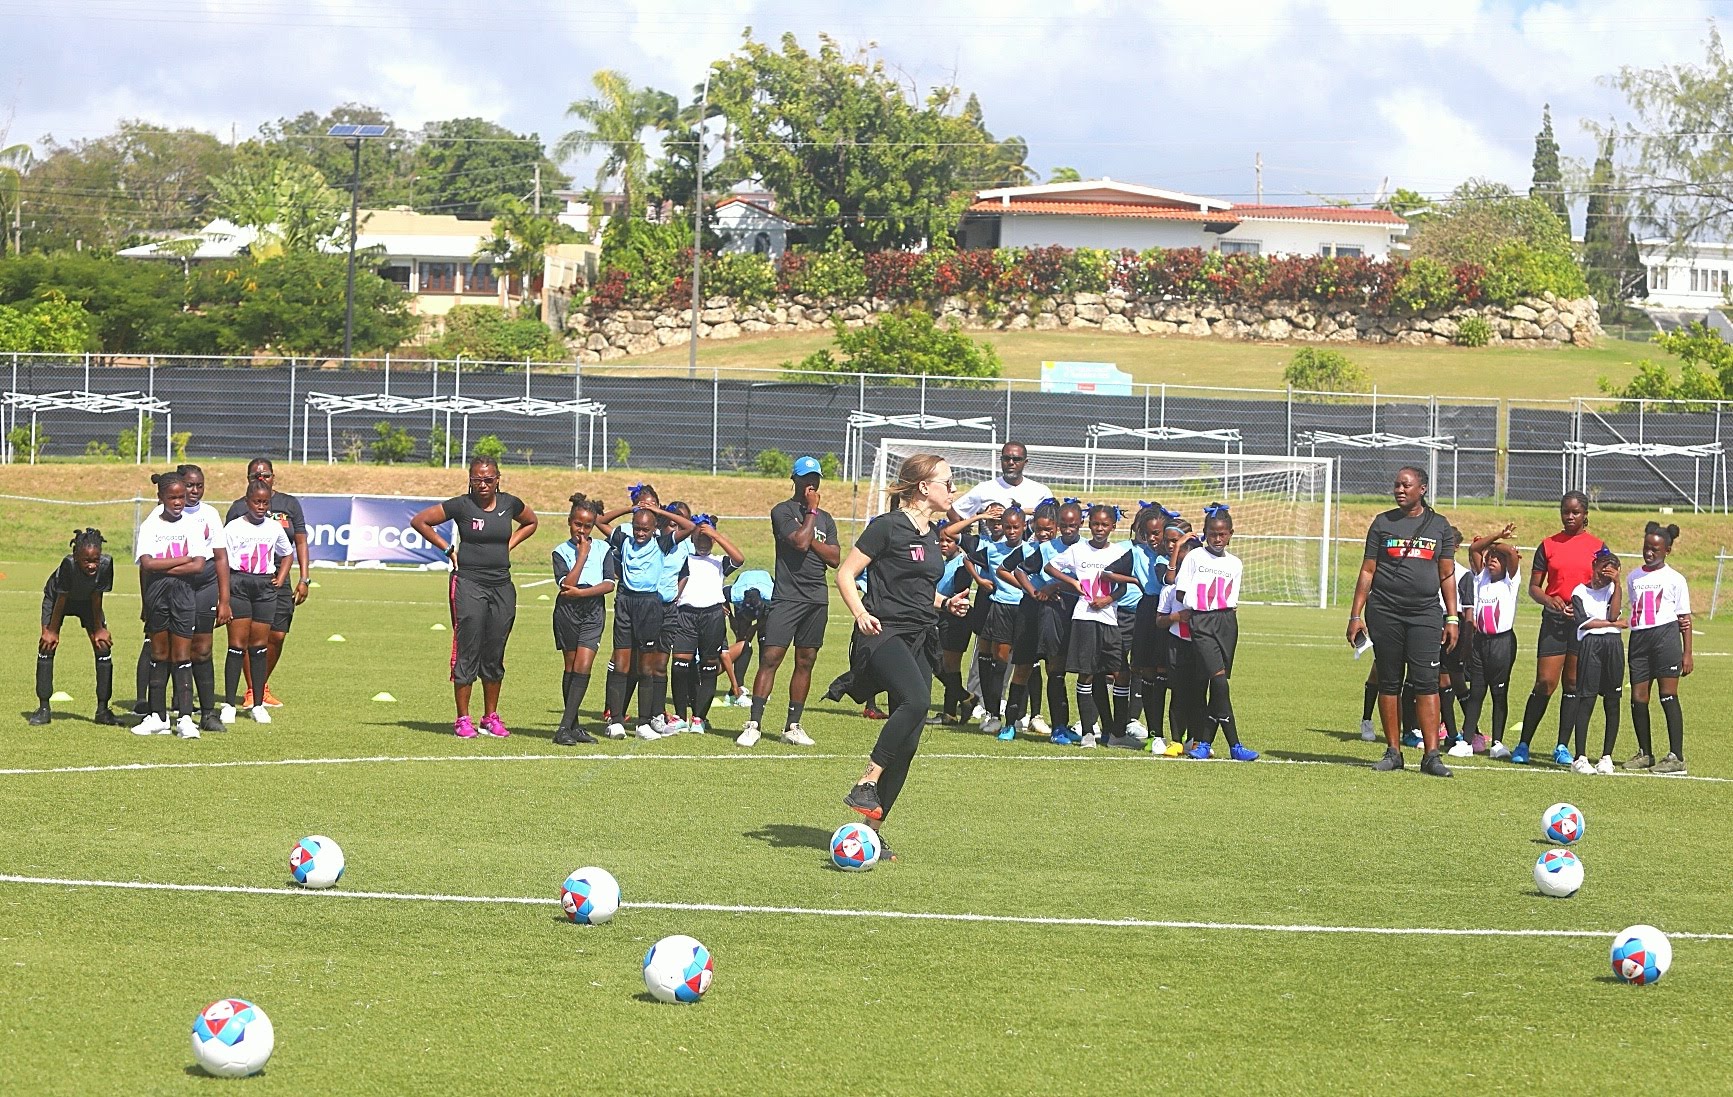 Concacaf W and Coaches Across Continents complete pilot program in Barbados